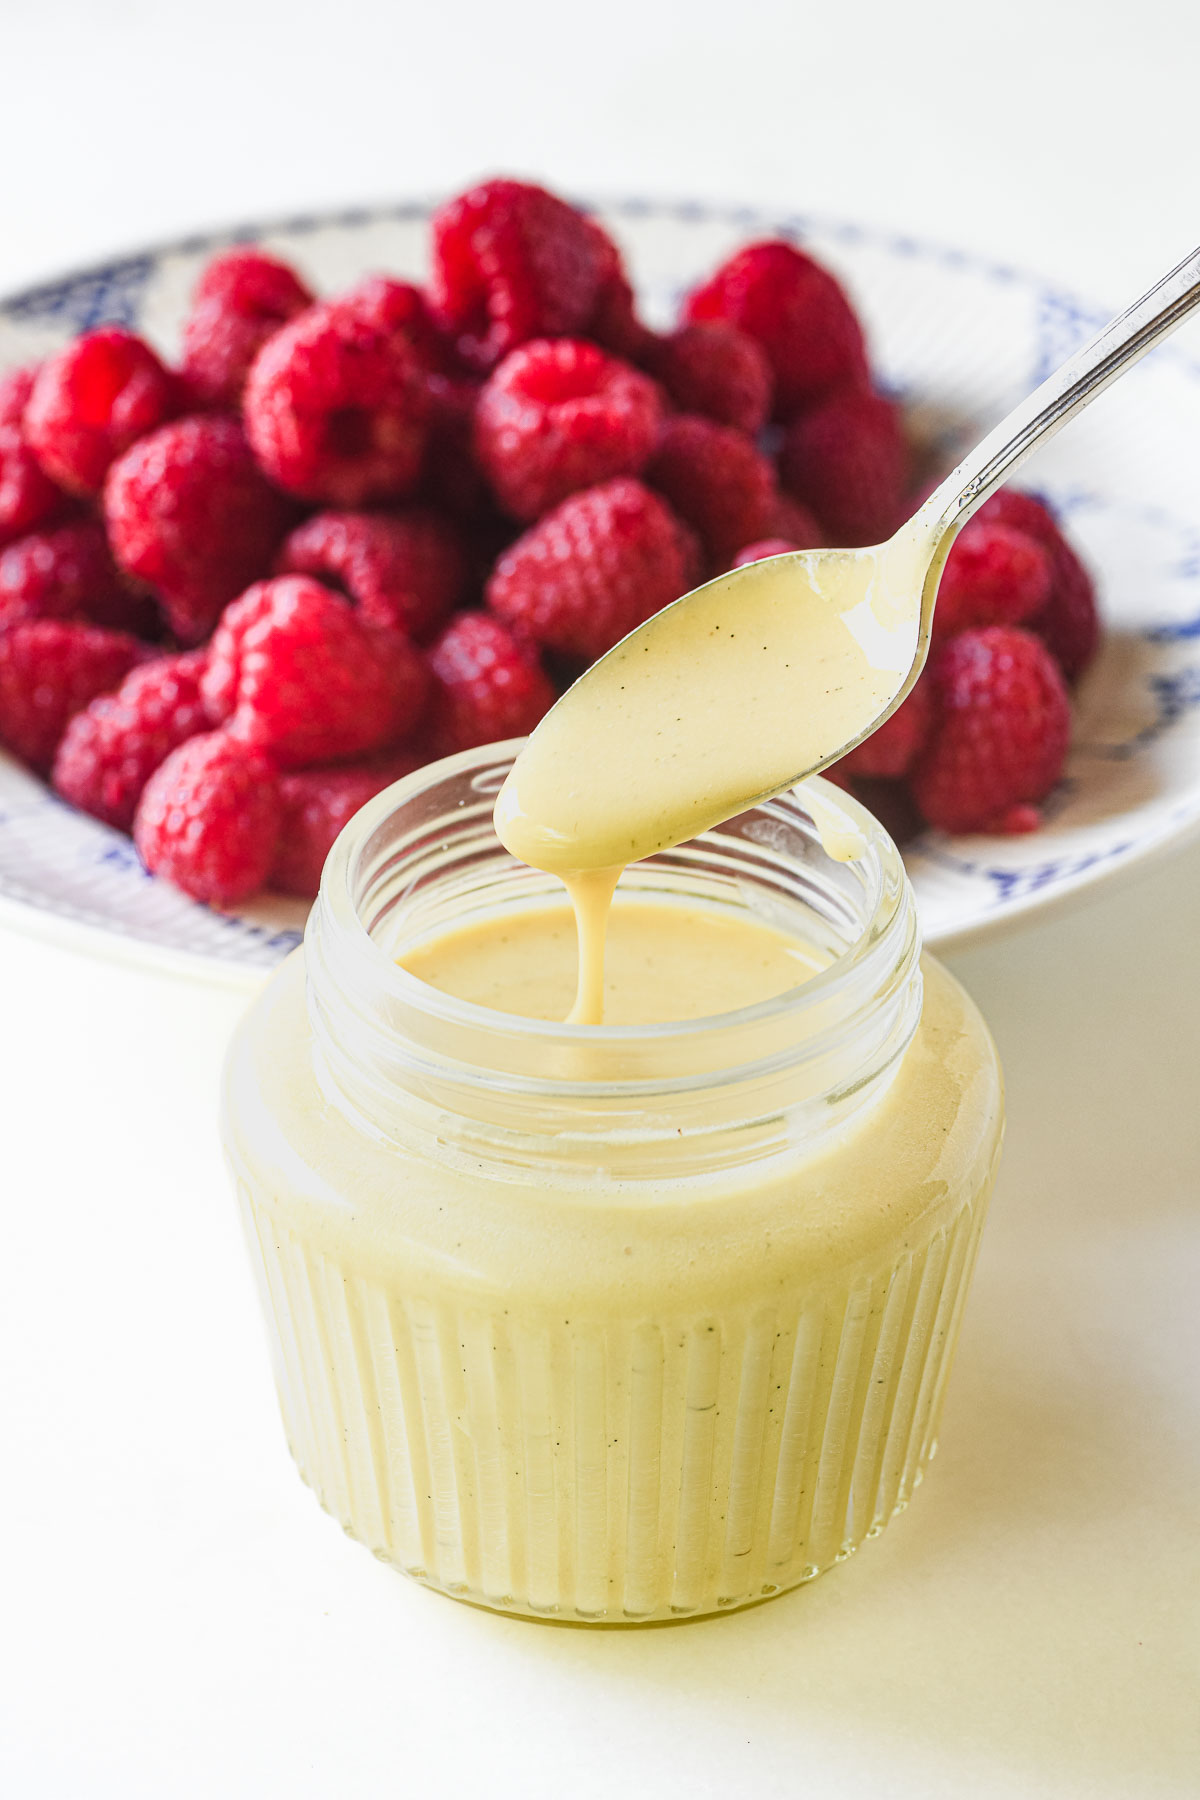 Scoop out a spoonful of heavy crème anglaise from a jar.